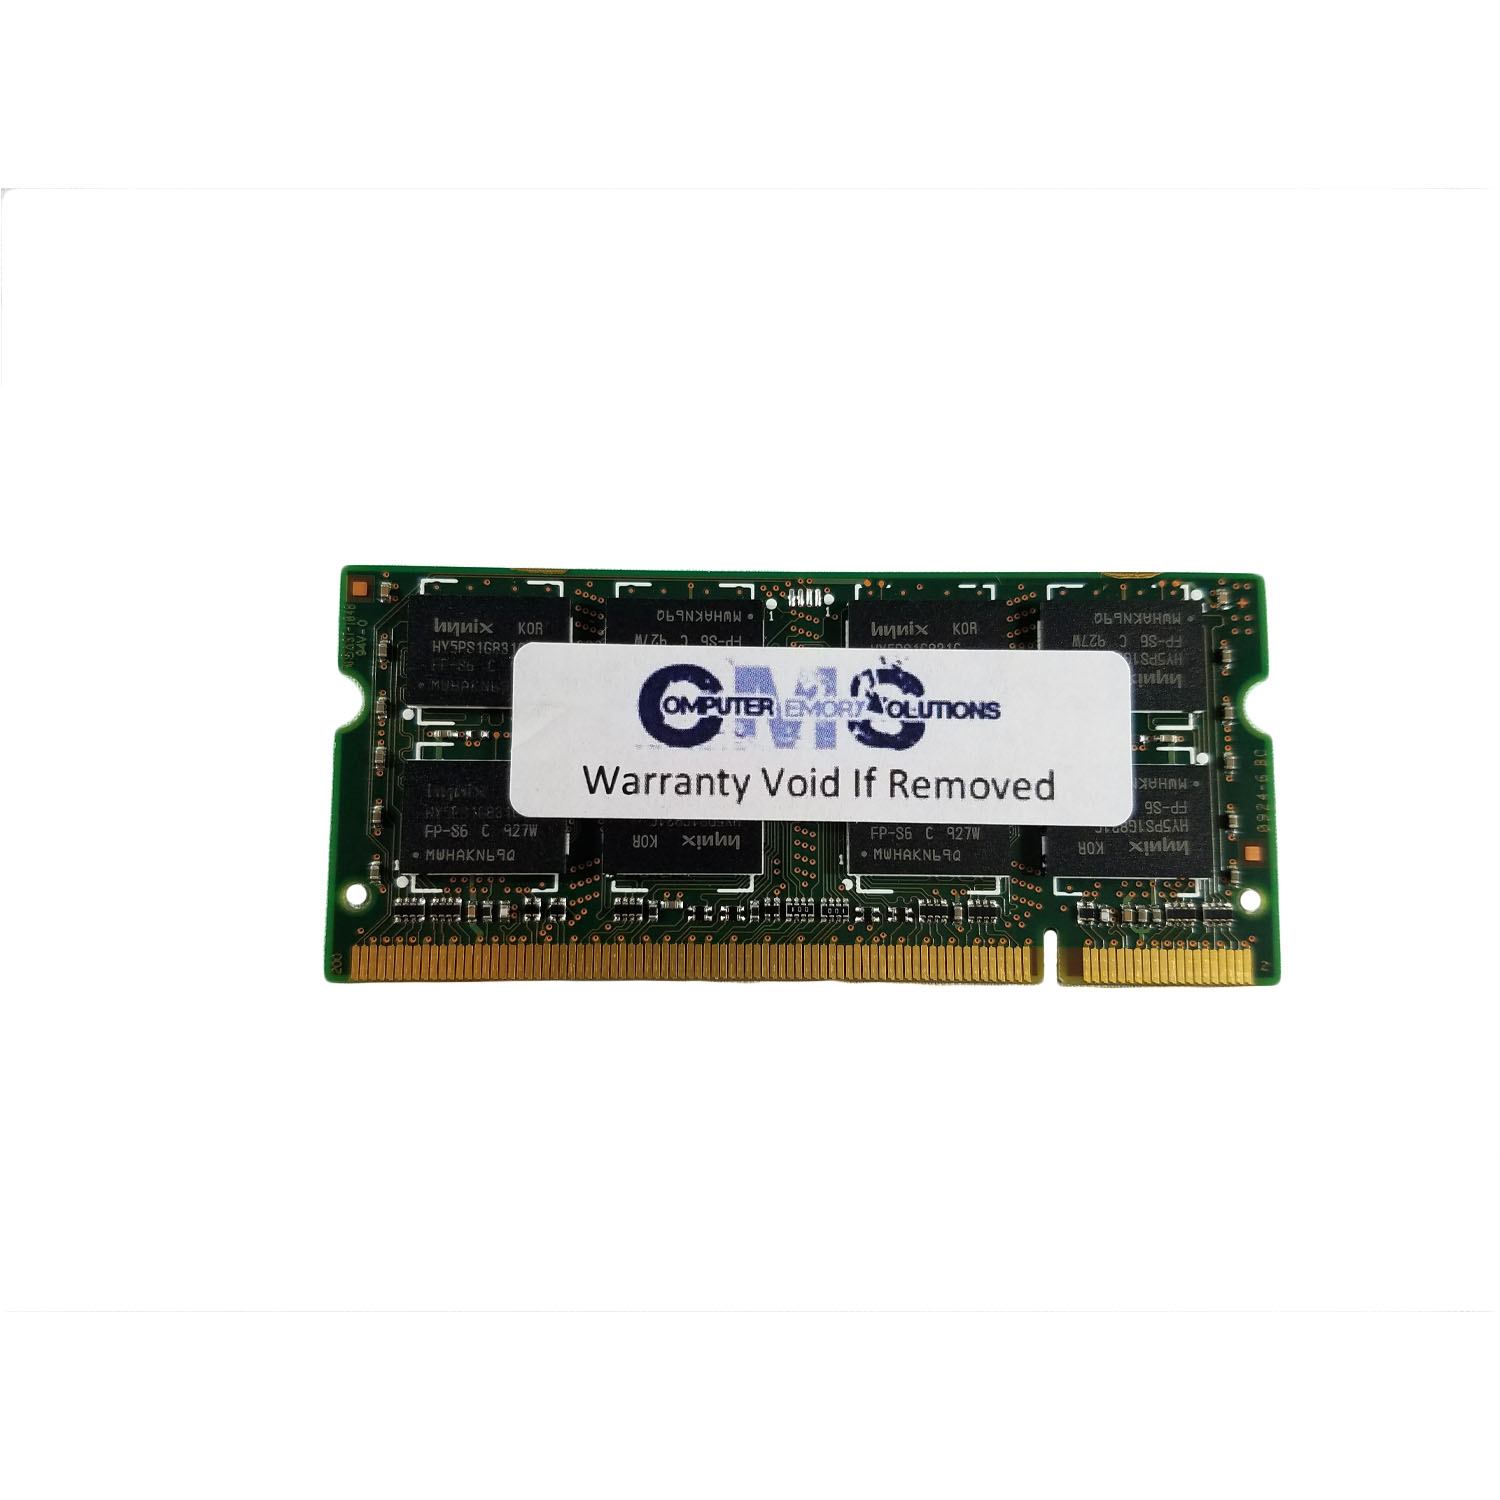 CMS 2GB (1X2GB) DDR2 5300 667MHZ NON ECC SODIMM Memory Ram Upgrade Compatible with Apple® Macbook Pro "Core 2 Duo" 2.33 17" Notebook - A38 - image 1 of 2